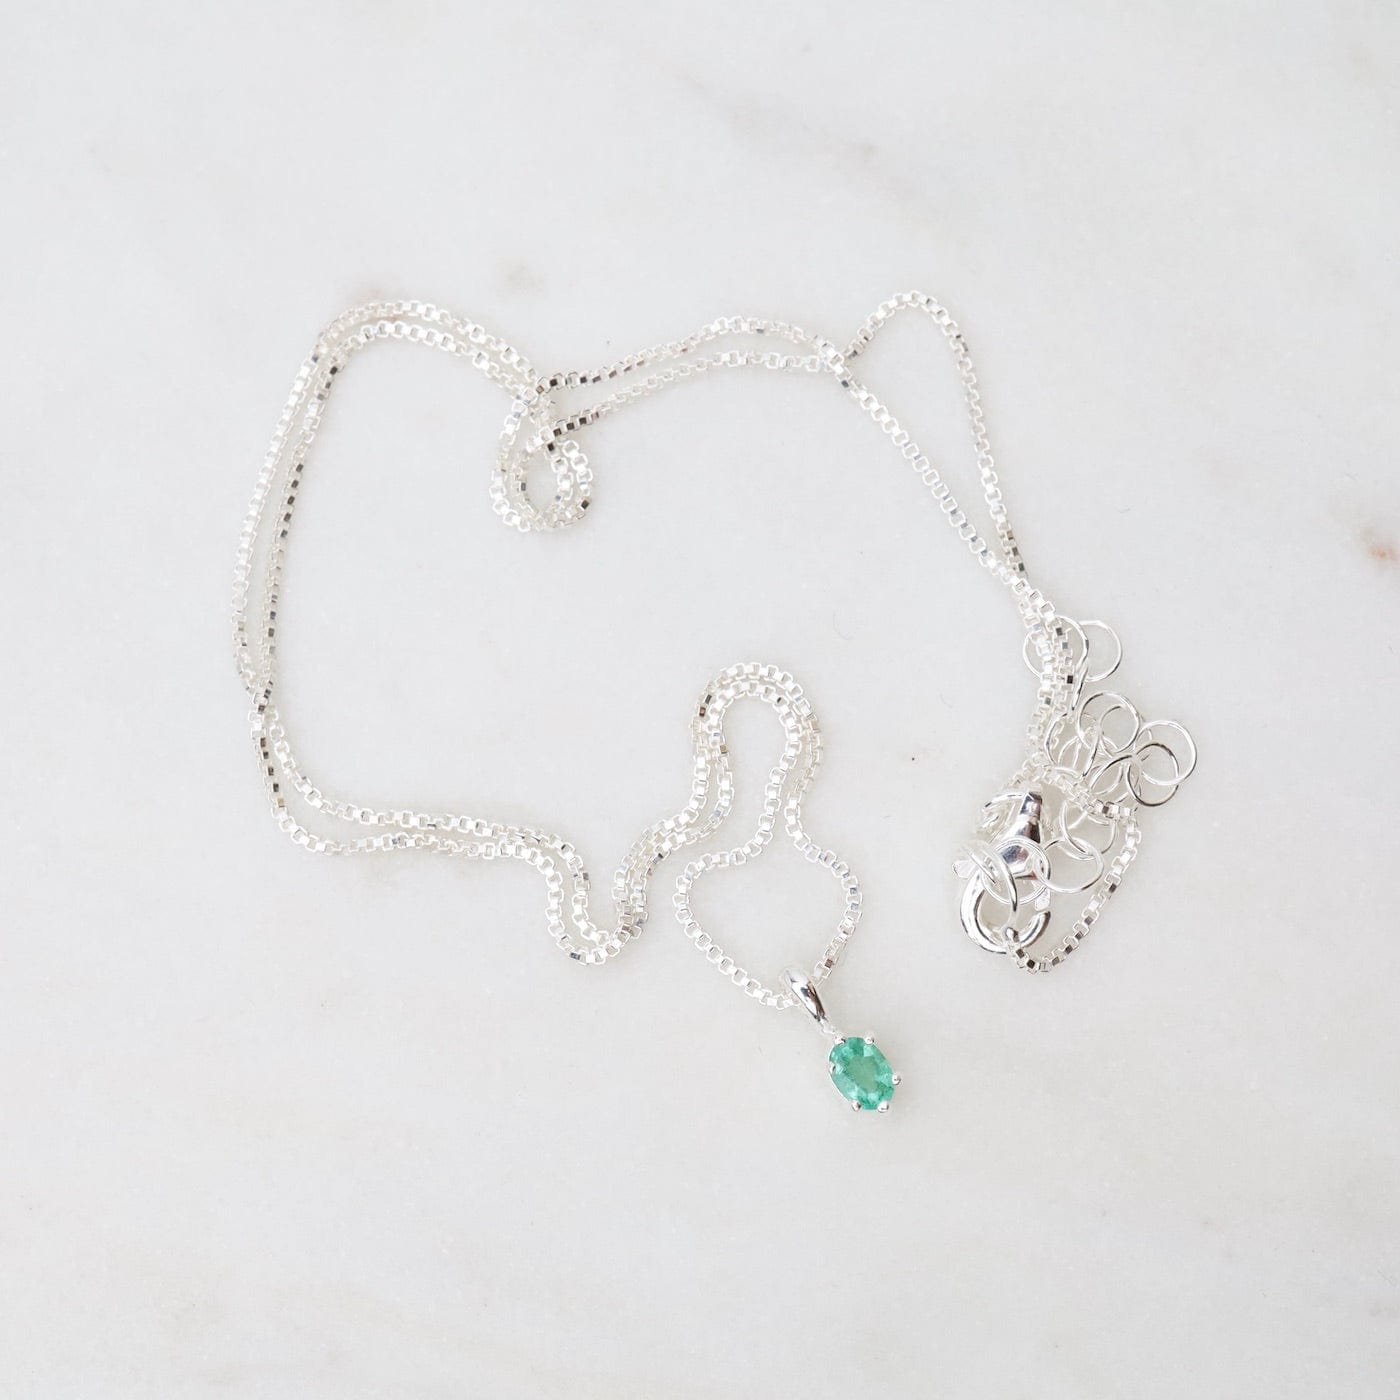 NKL Oval Claw-set Emerald Necklace - Sterling Silver